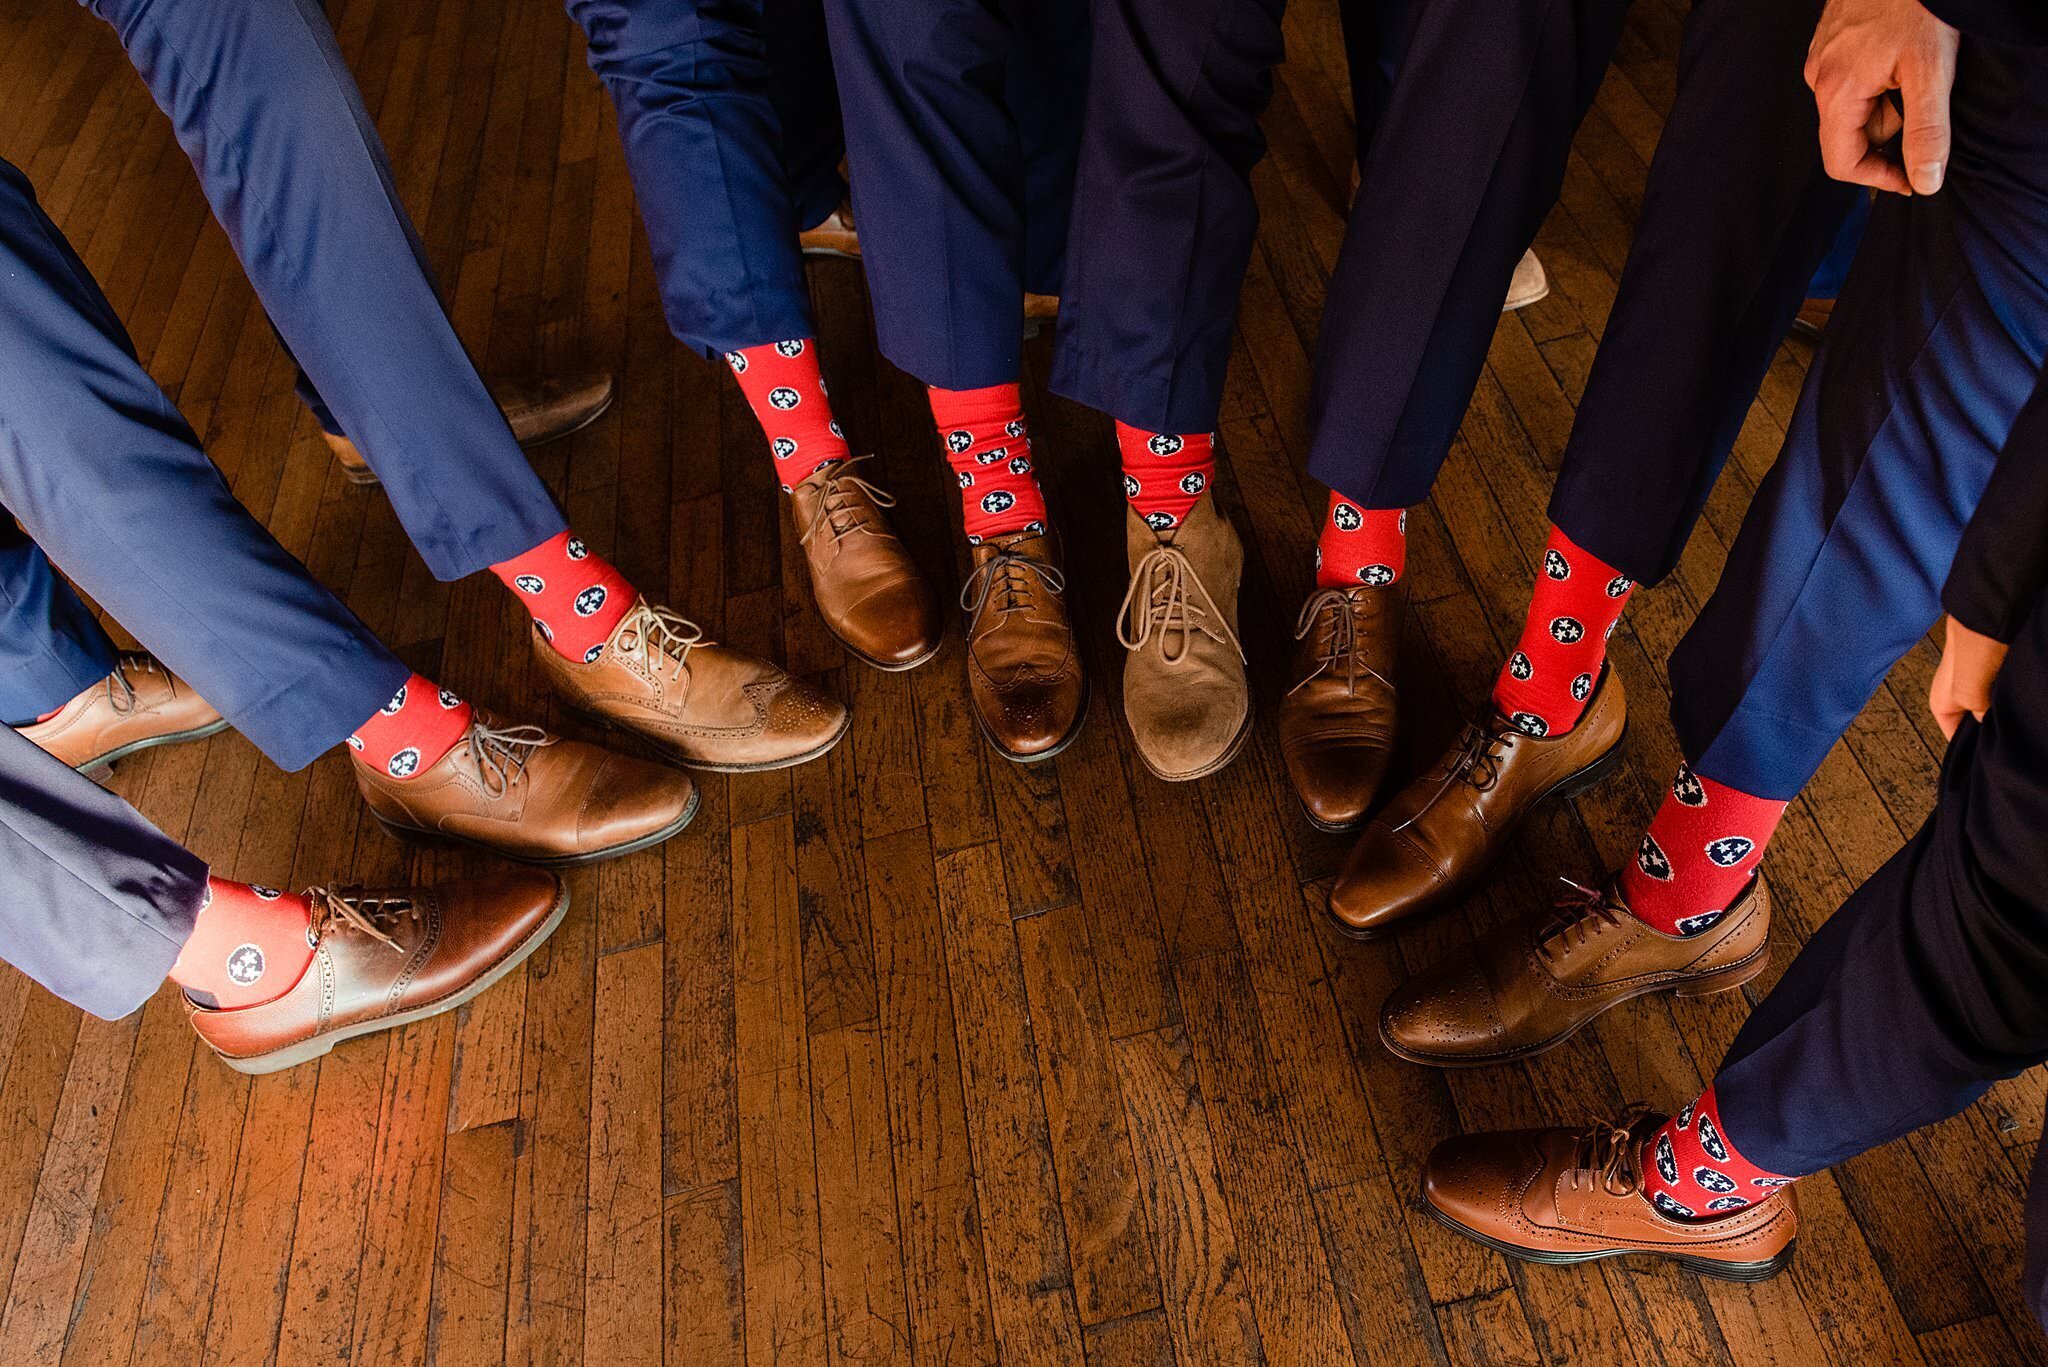 Detail photo of groomsmen wearing tri-star Tennessee state socks and brown shoes